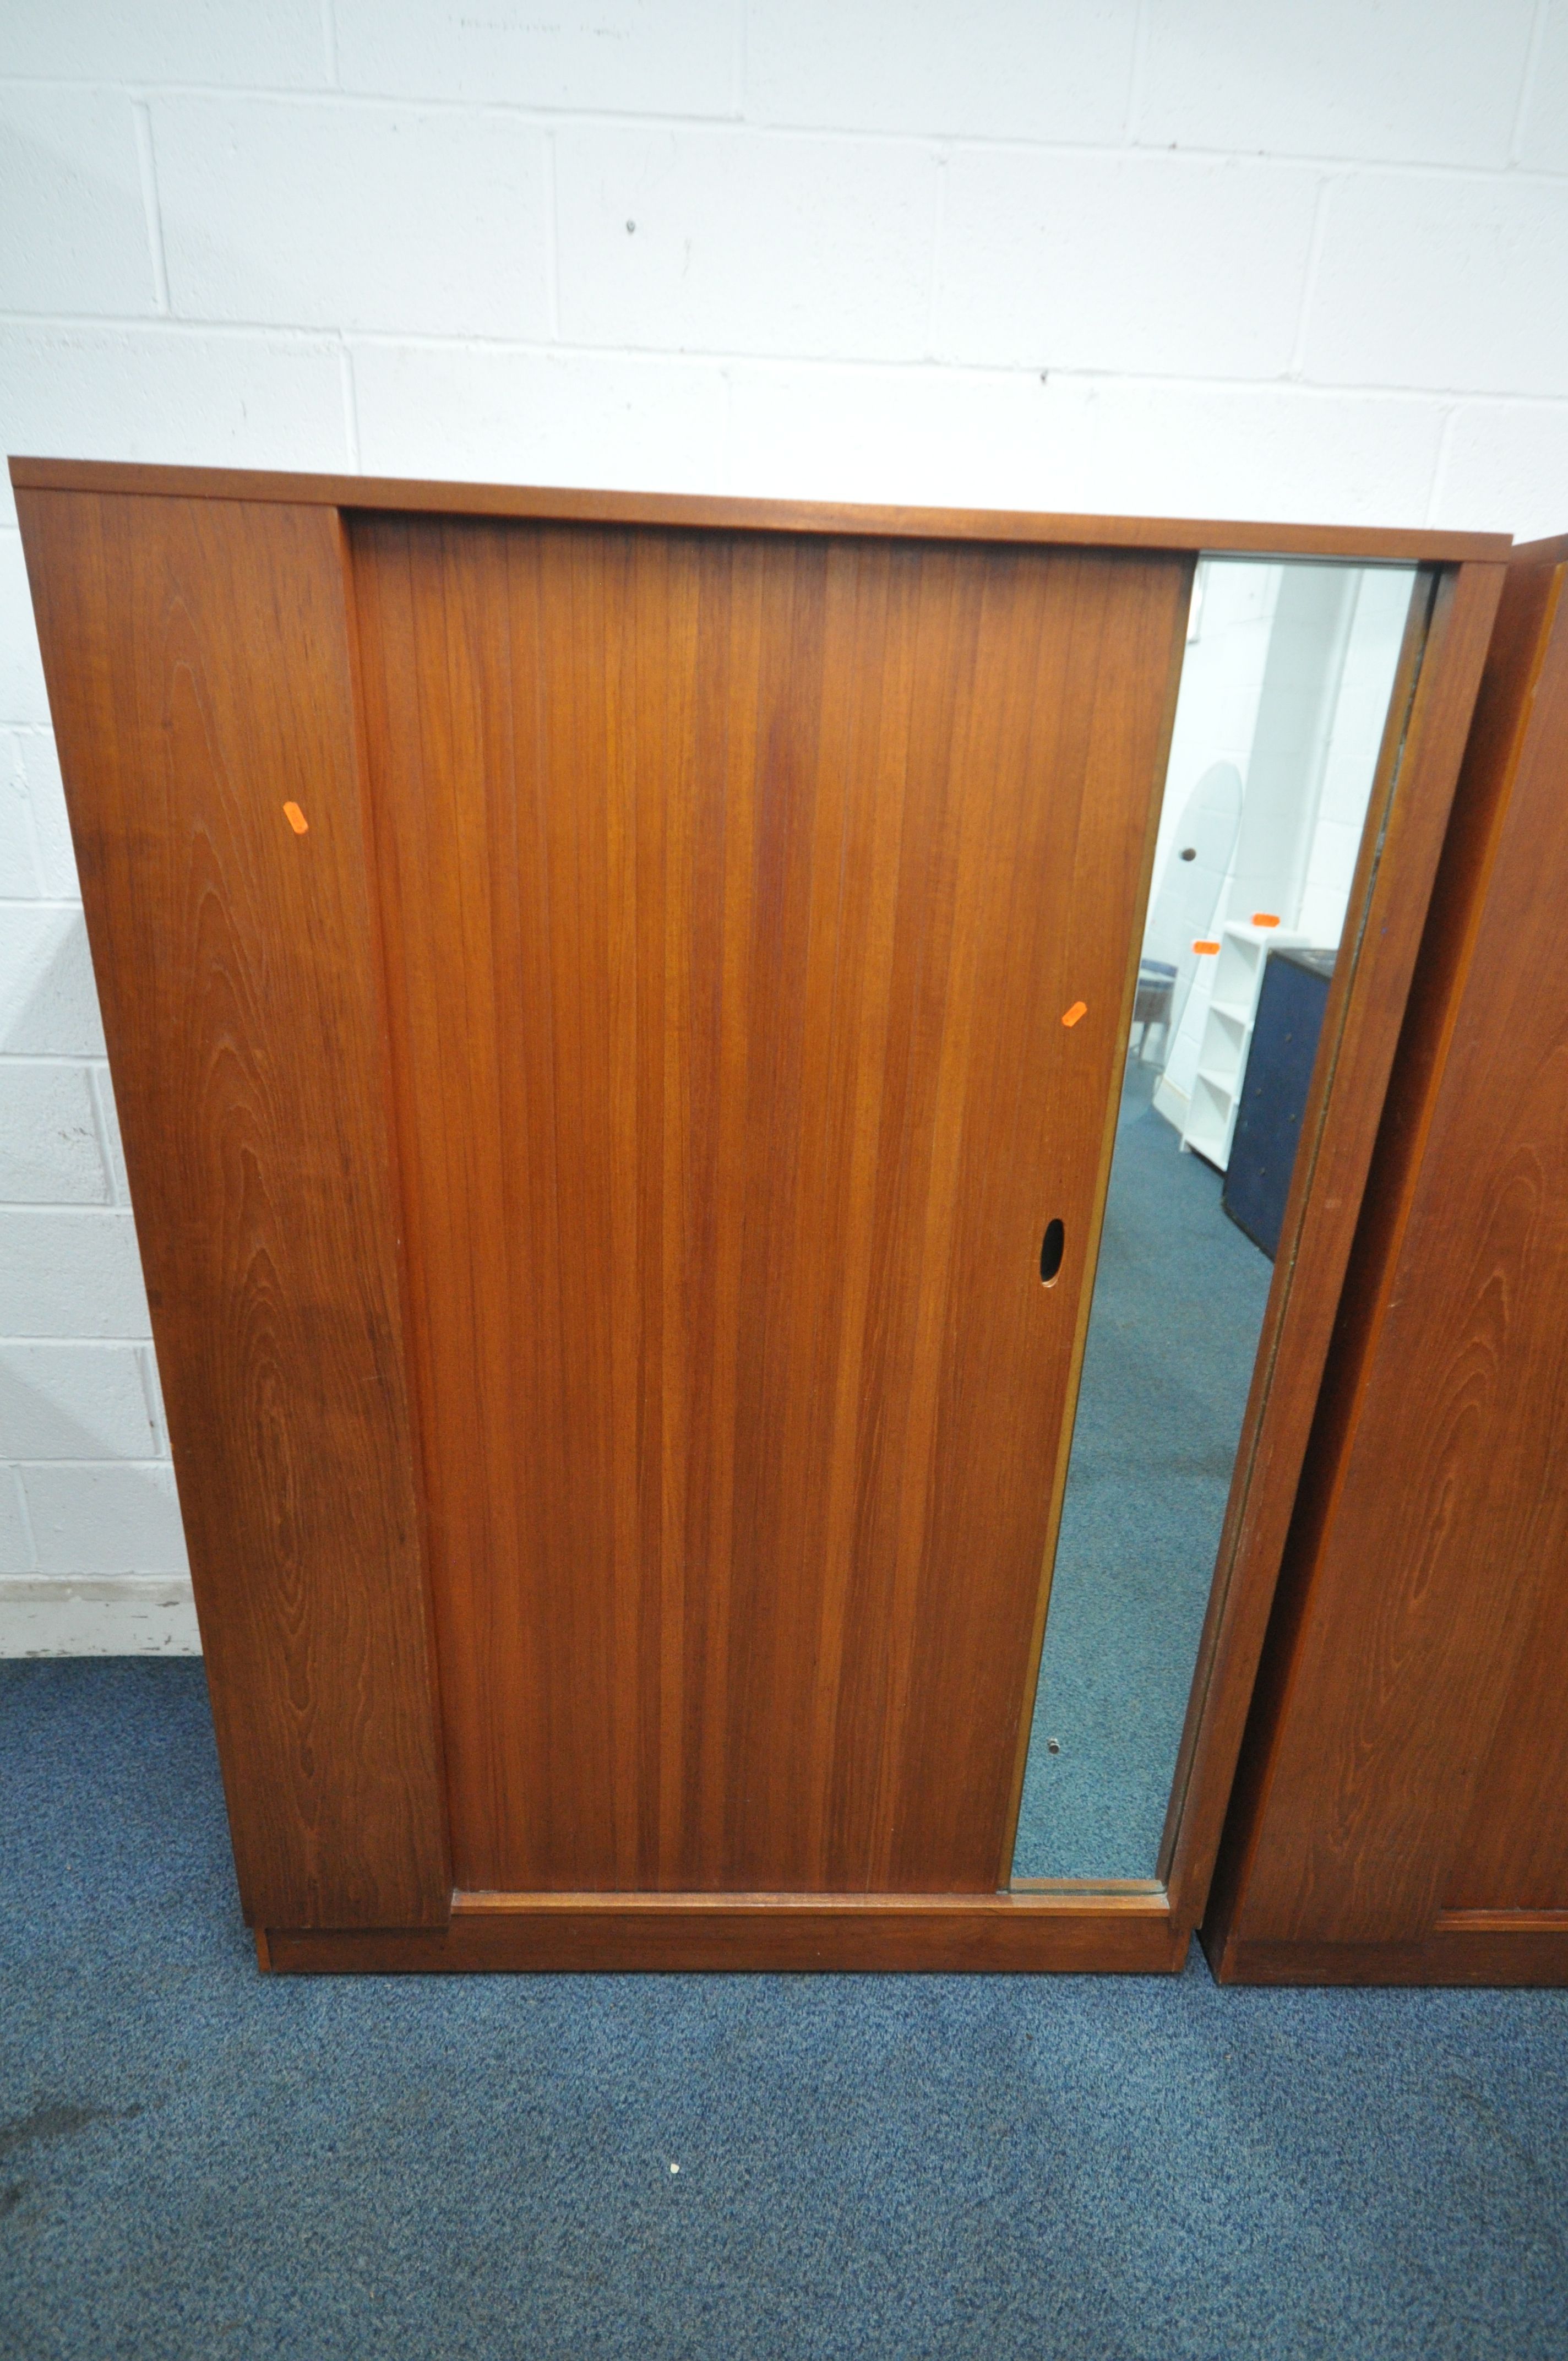 AN AUSTINSUITE MID CENTURY TEAK WARDROBE, with a single tambour sliding door and mirror, width 122cm - Image 2 of 4